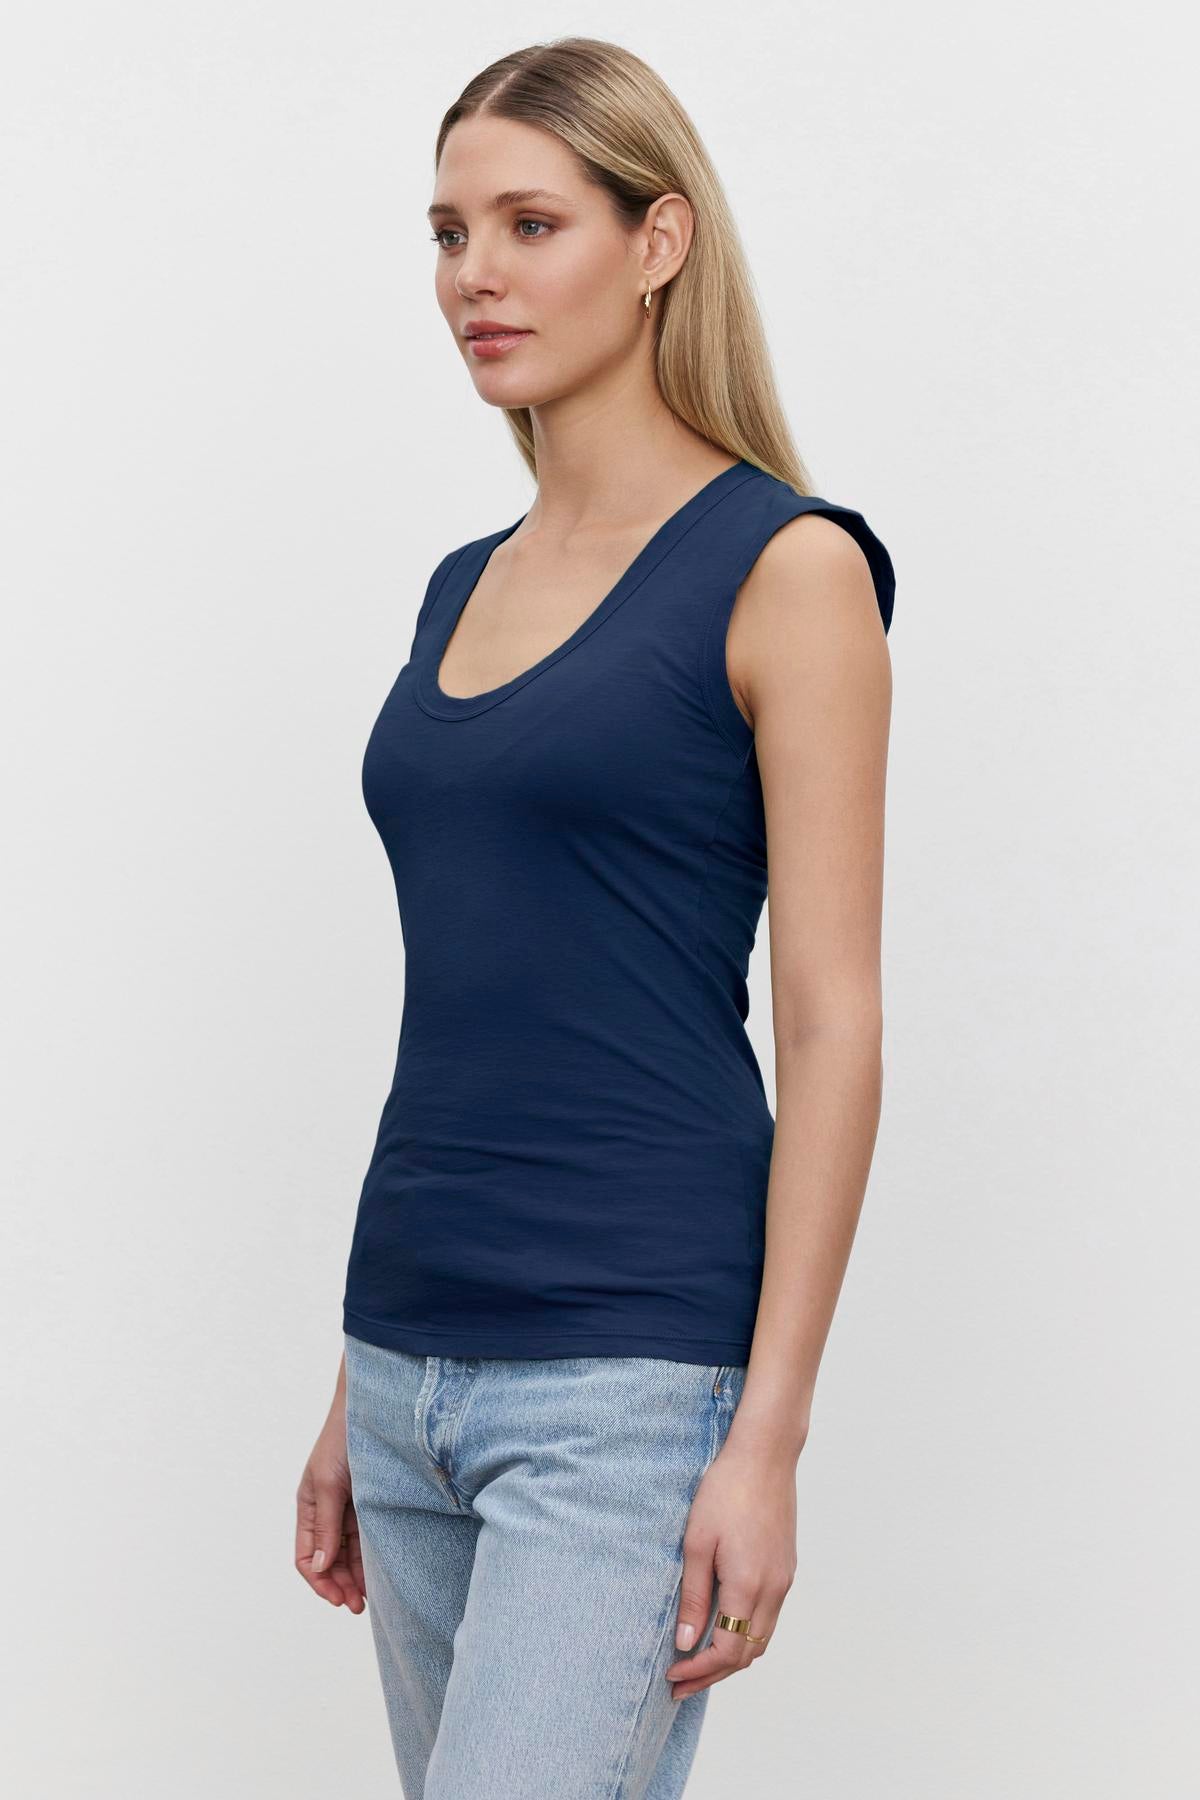 A woman wearing a Velvet by Graham & Spencer ESTINA GAUZY WHISPER FITTED TANK TOP and jeans with a low-scoop-neck.-36273869619393